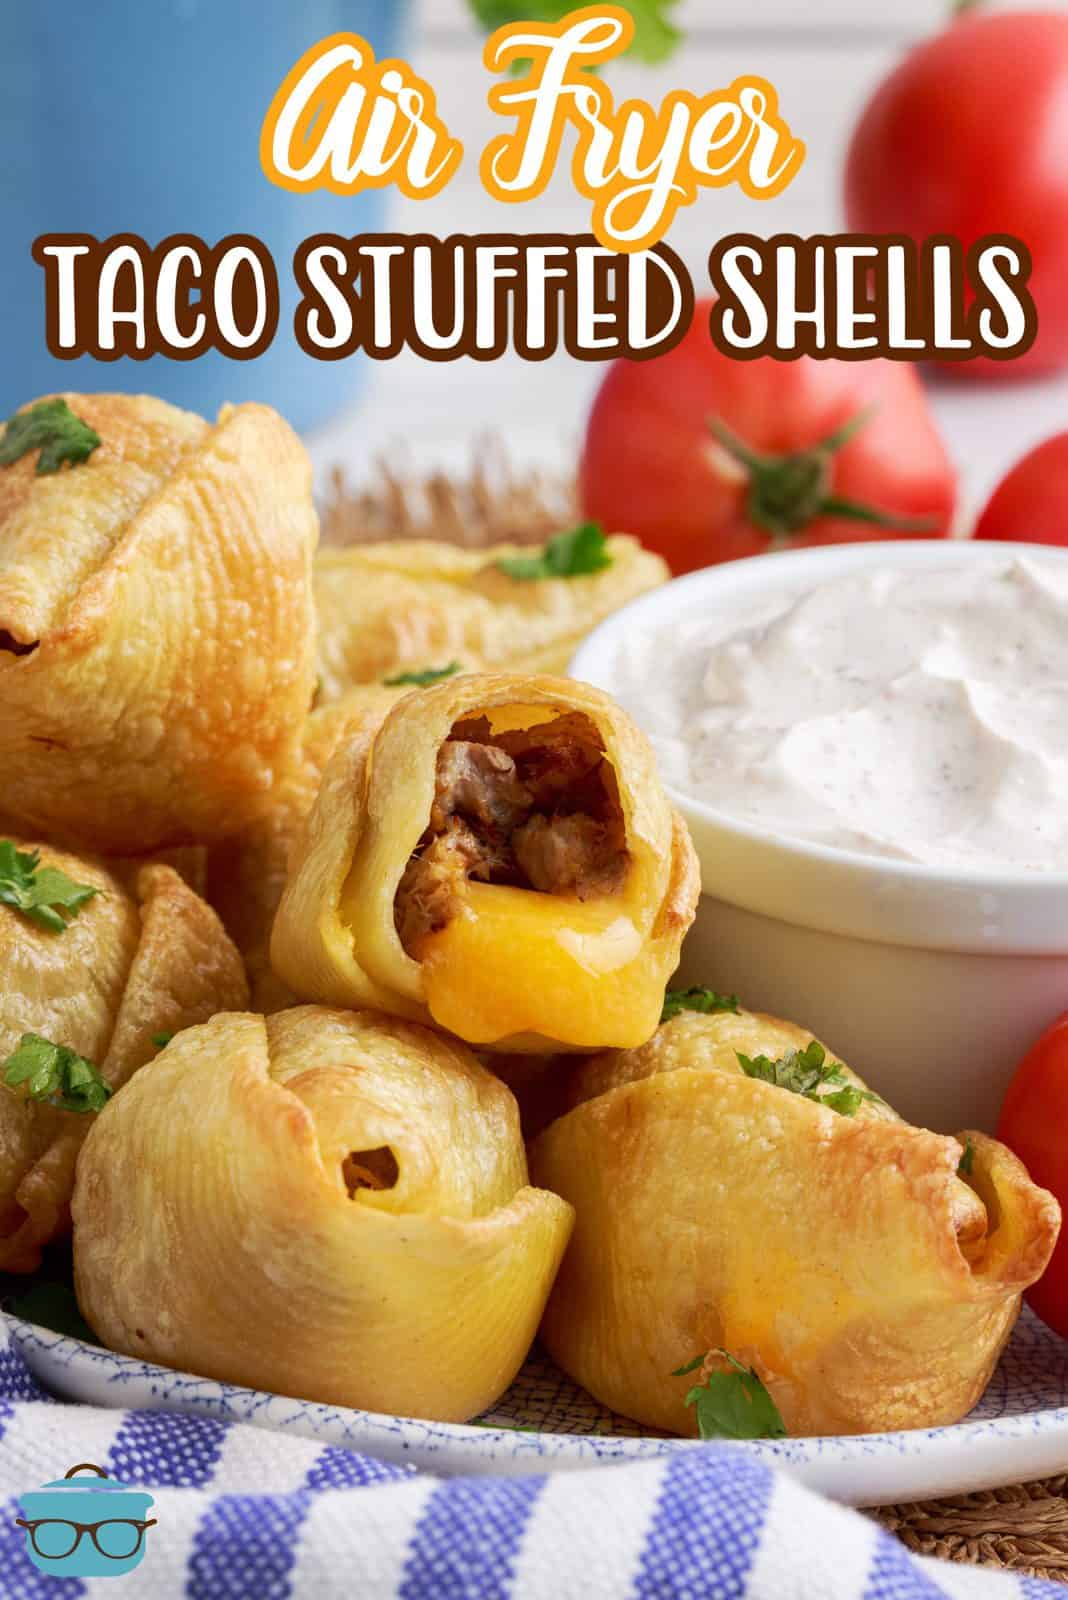 Pinterest image of Air Fryer Taco Stuffed Shells stacked on plate with one showing inside and cheese running out of it.